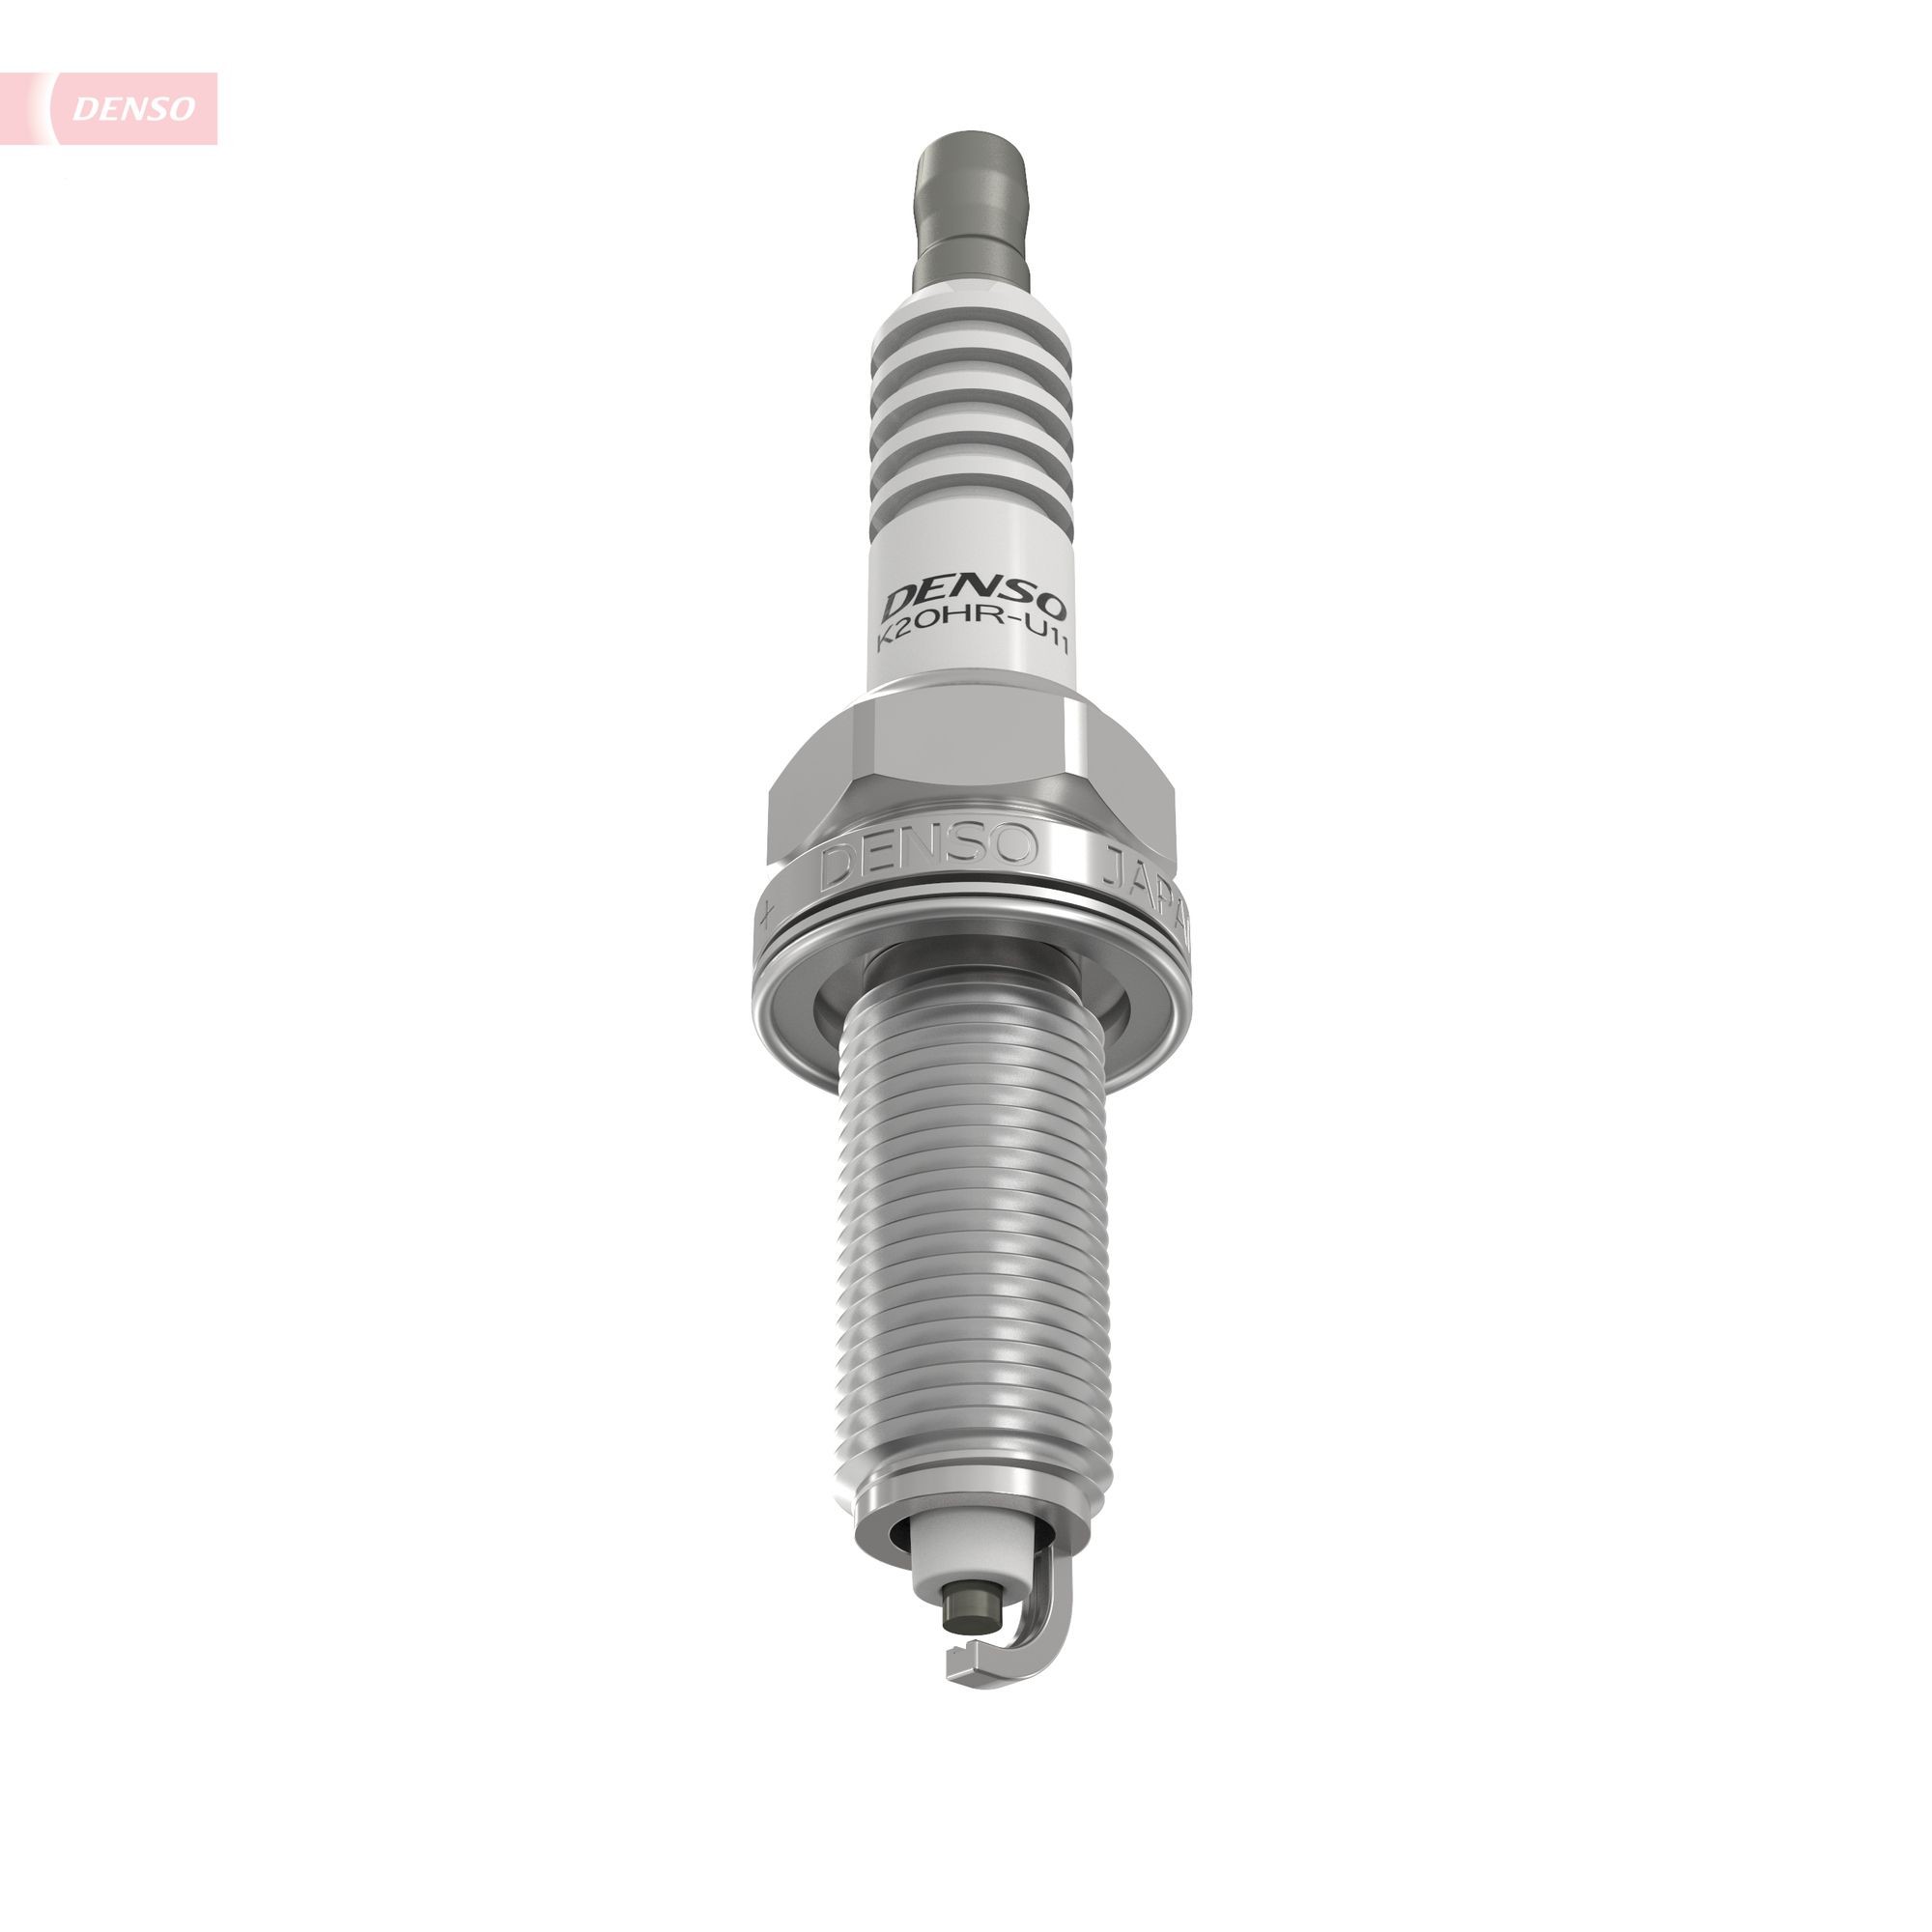 DENSO Spark plugs 3381 buy online